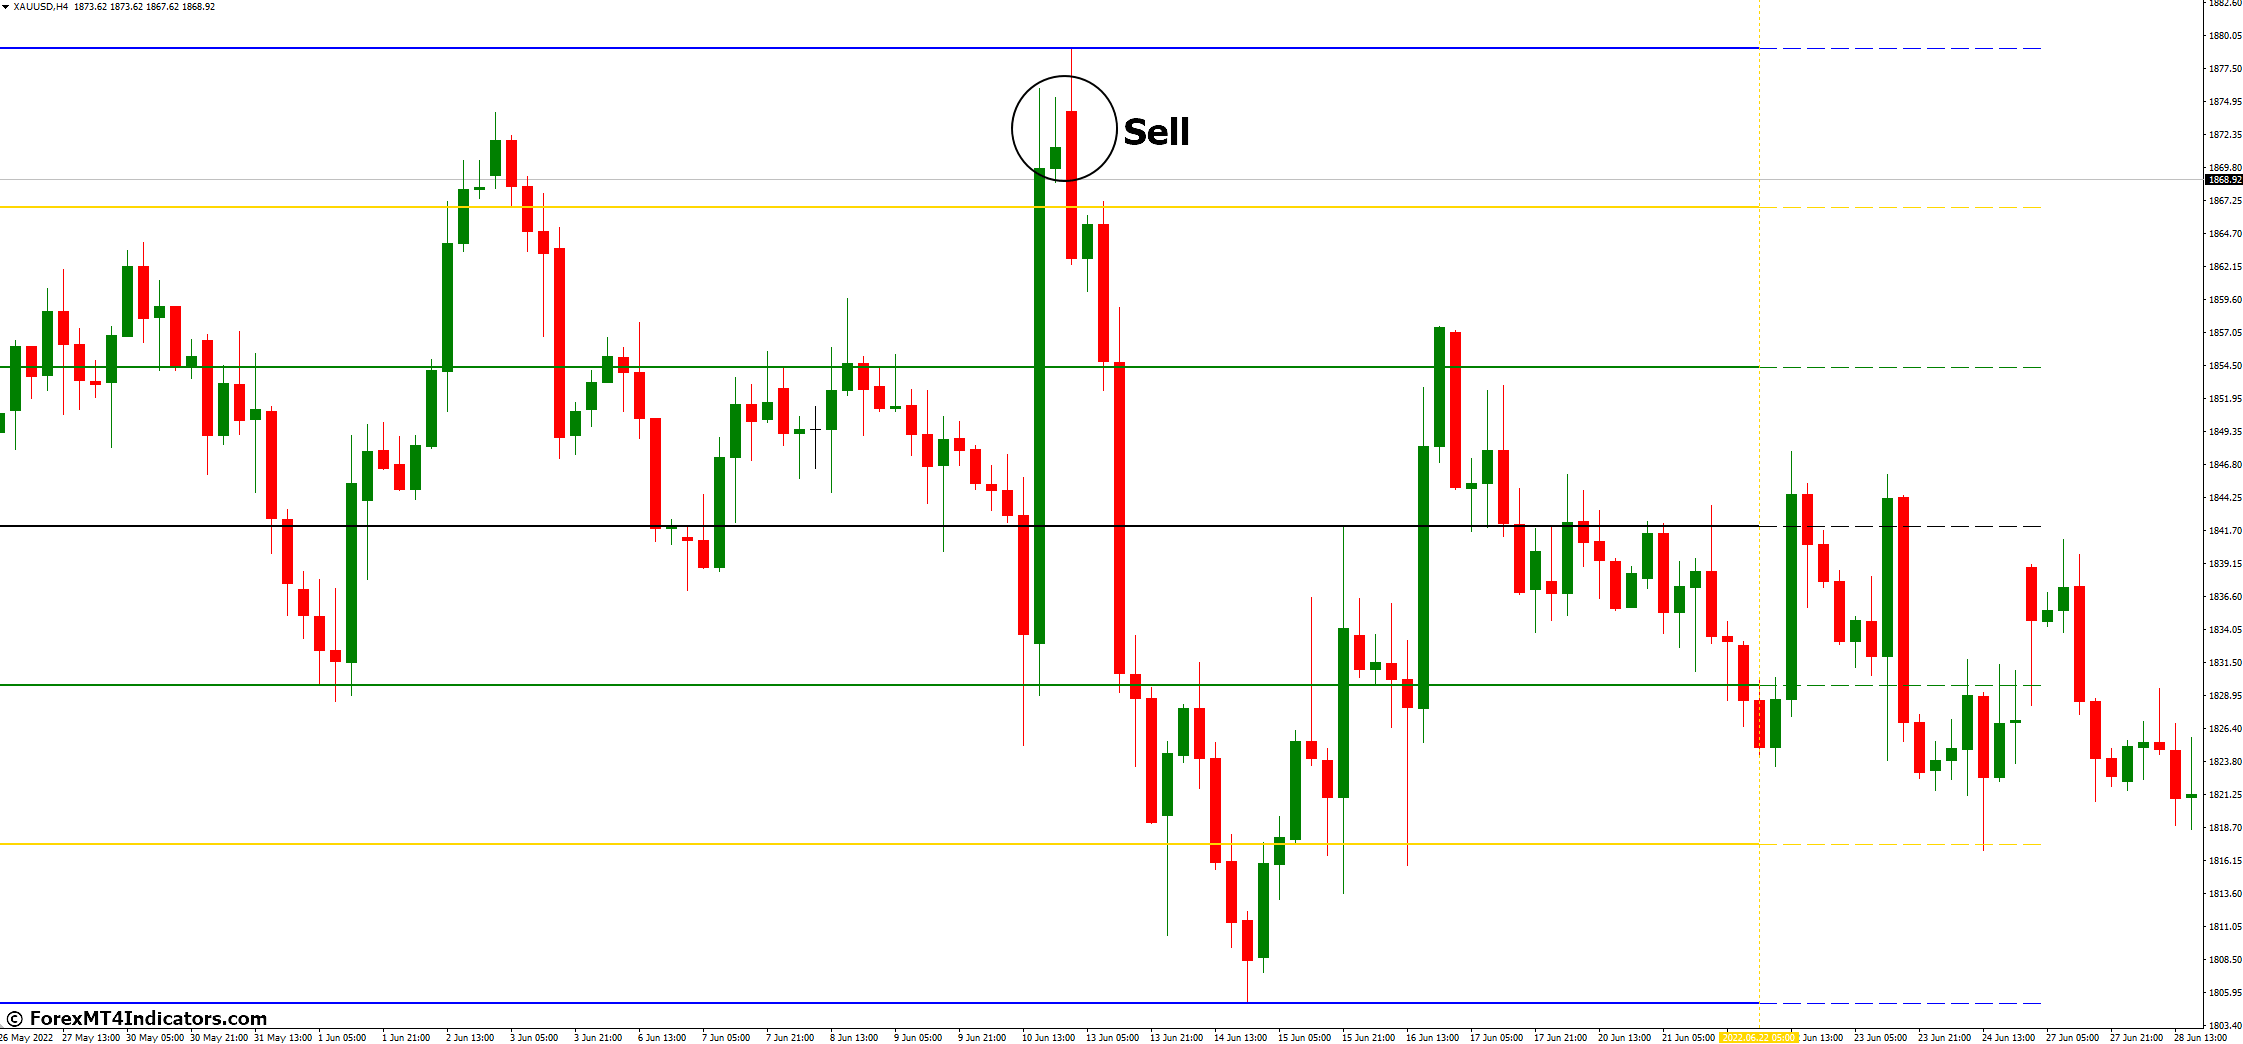 How to Trade with Support and Resistance Zone MT4 Indicator - Sell Entry